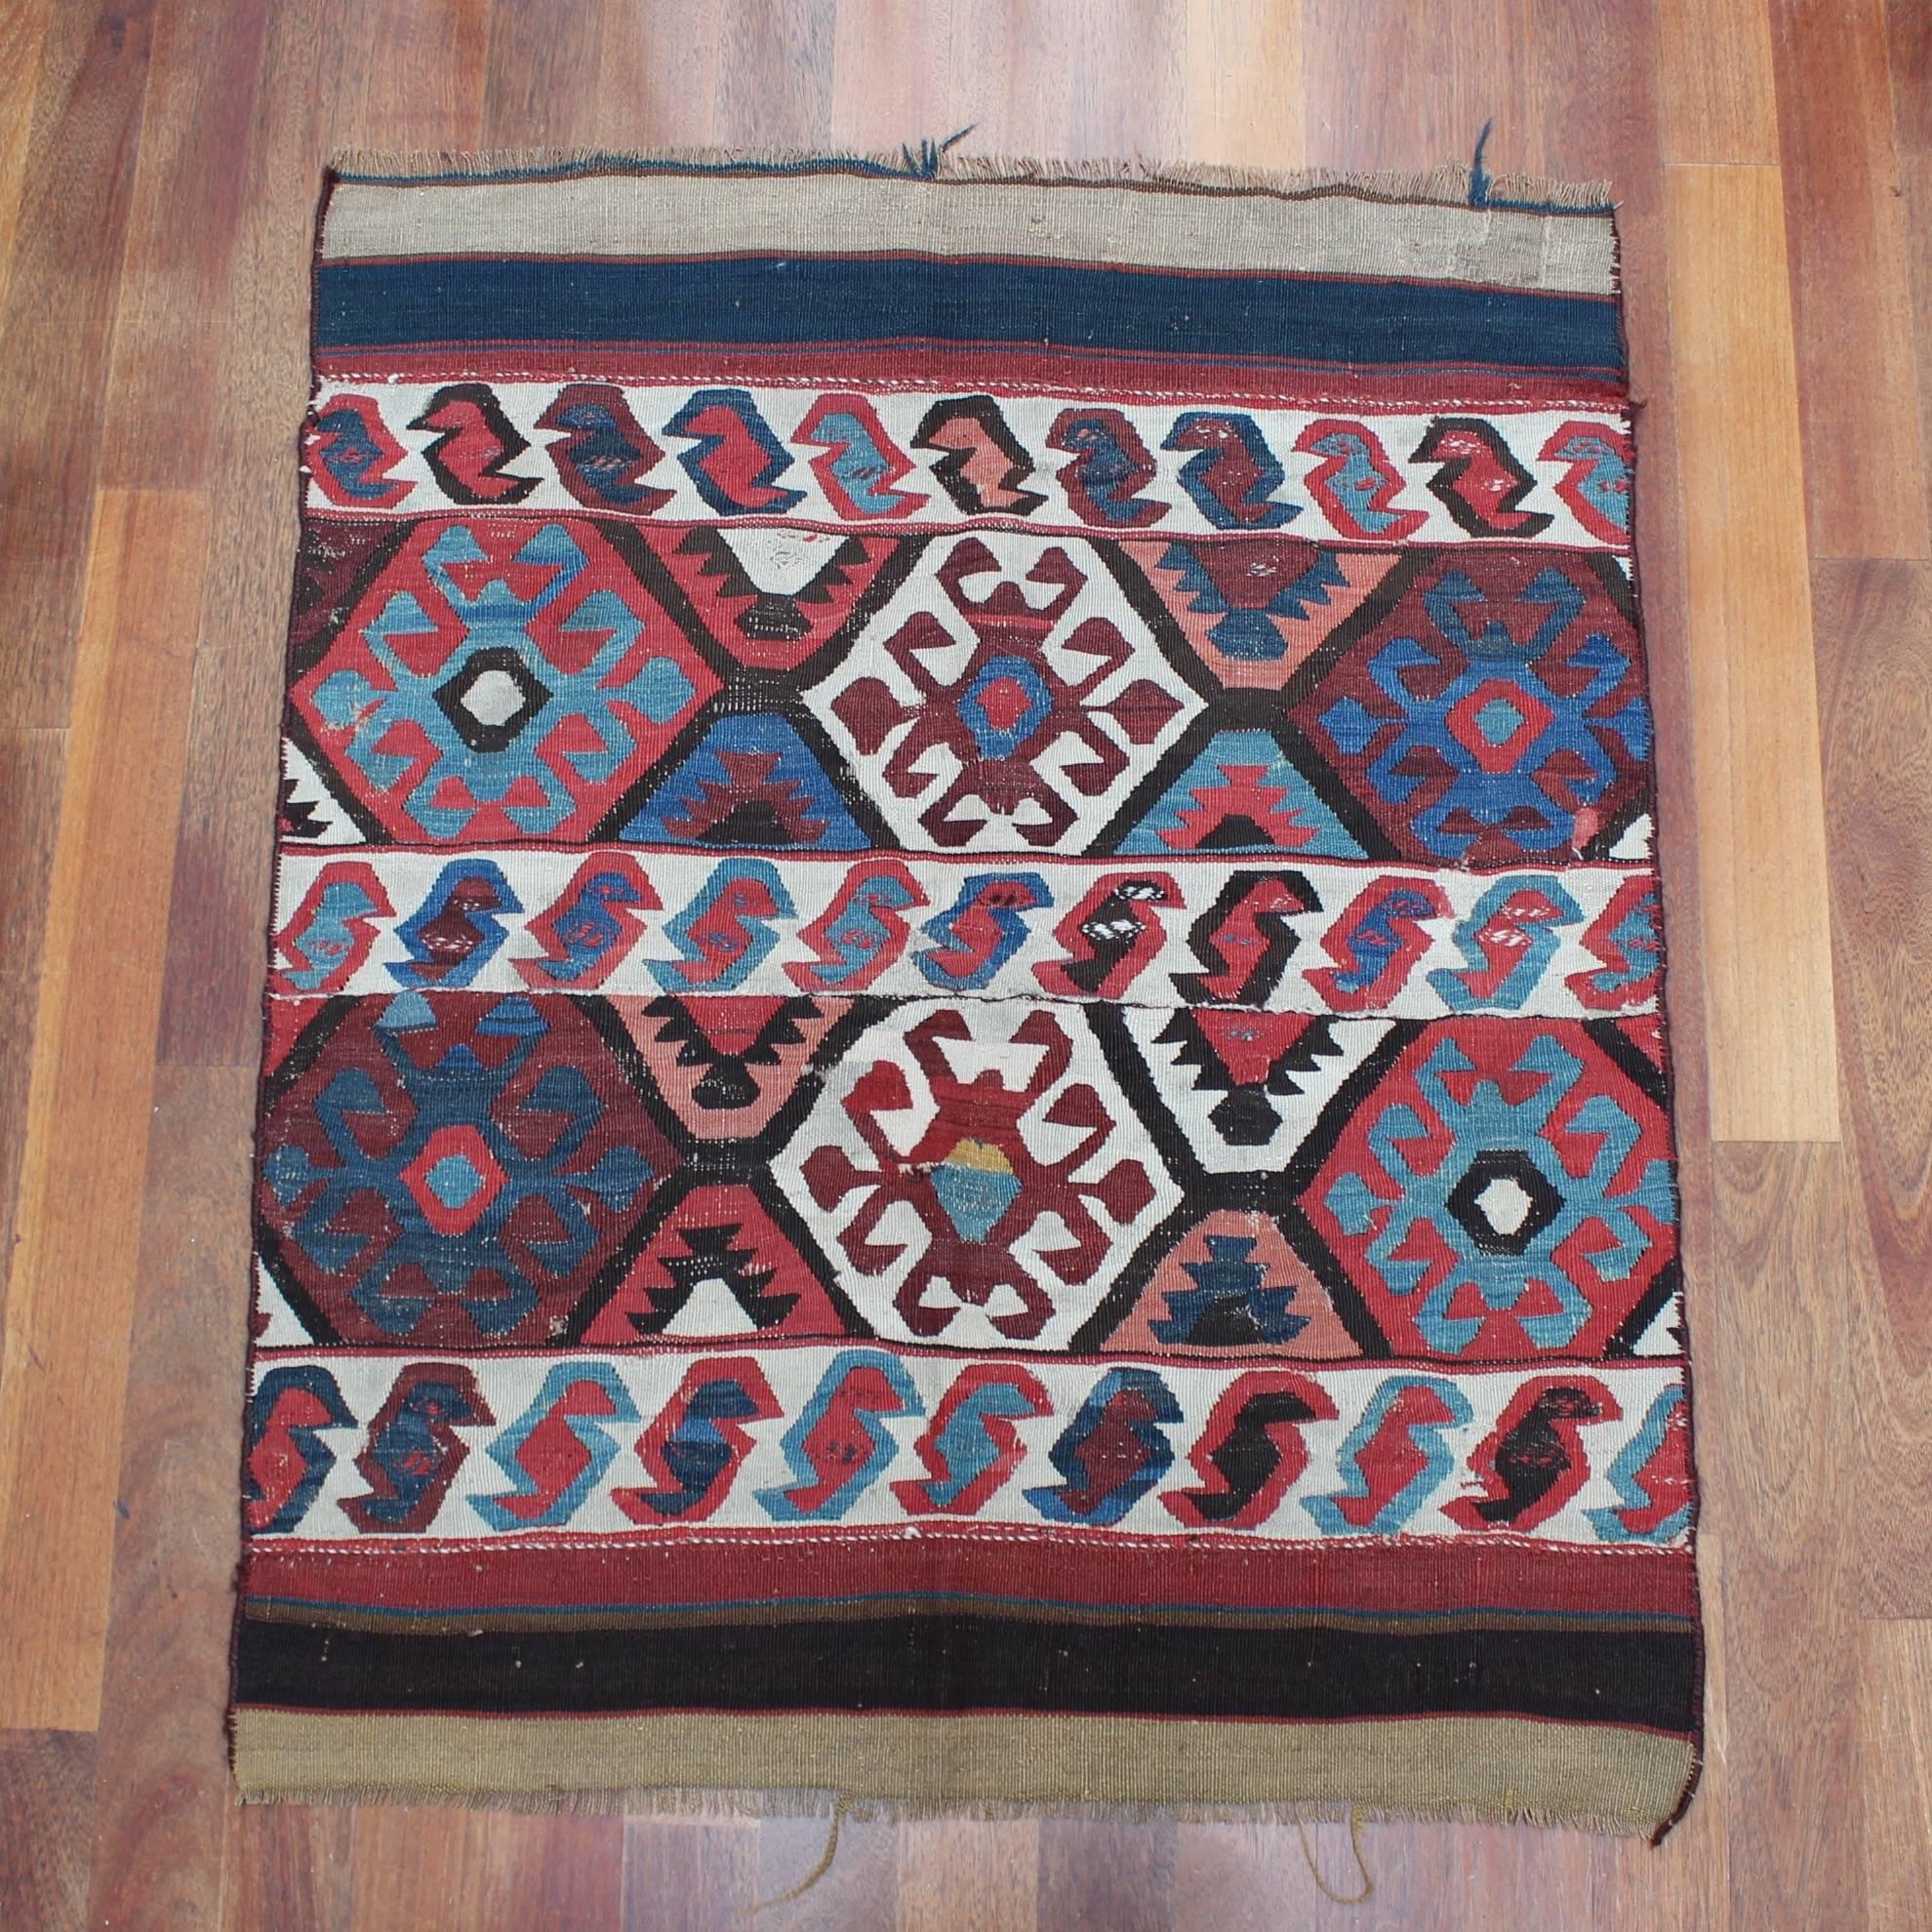 Antique Turkish Anatolian Kilim rug with scorpion motif, (circa early 1900s) in very good condition. Short video of the item is available upon request. 

Dimensions:
120 cm (47.24